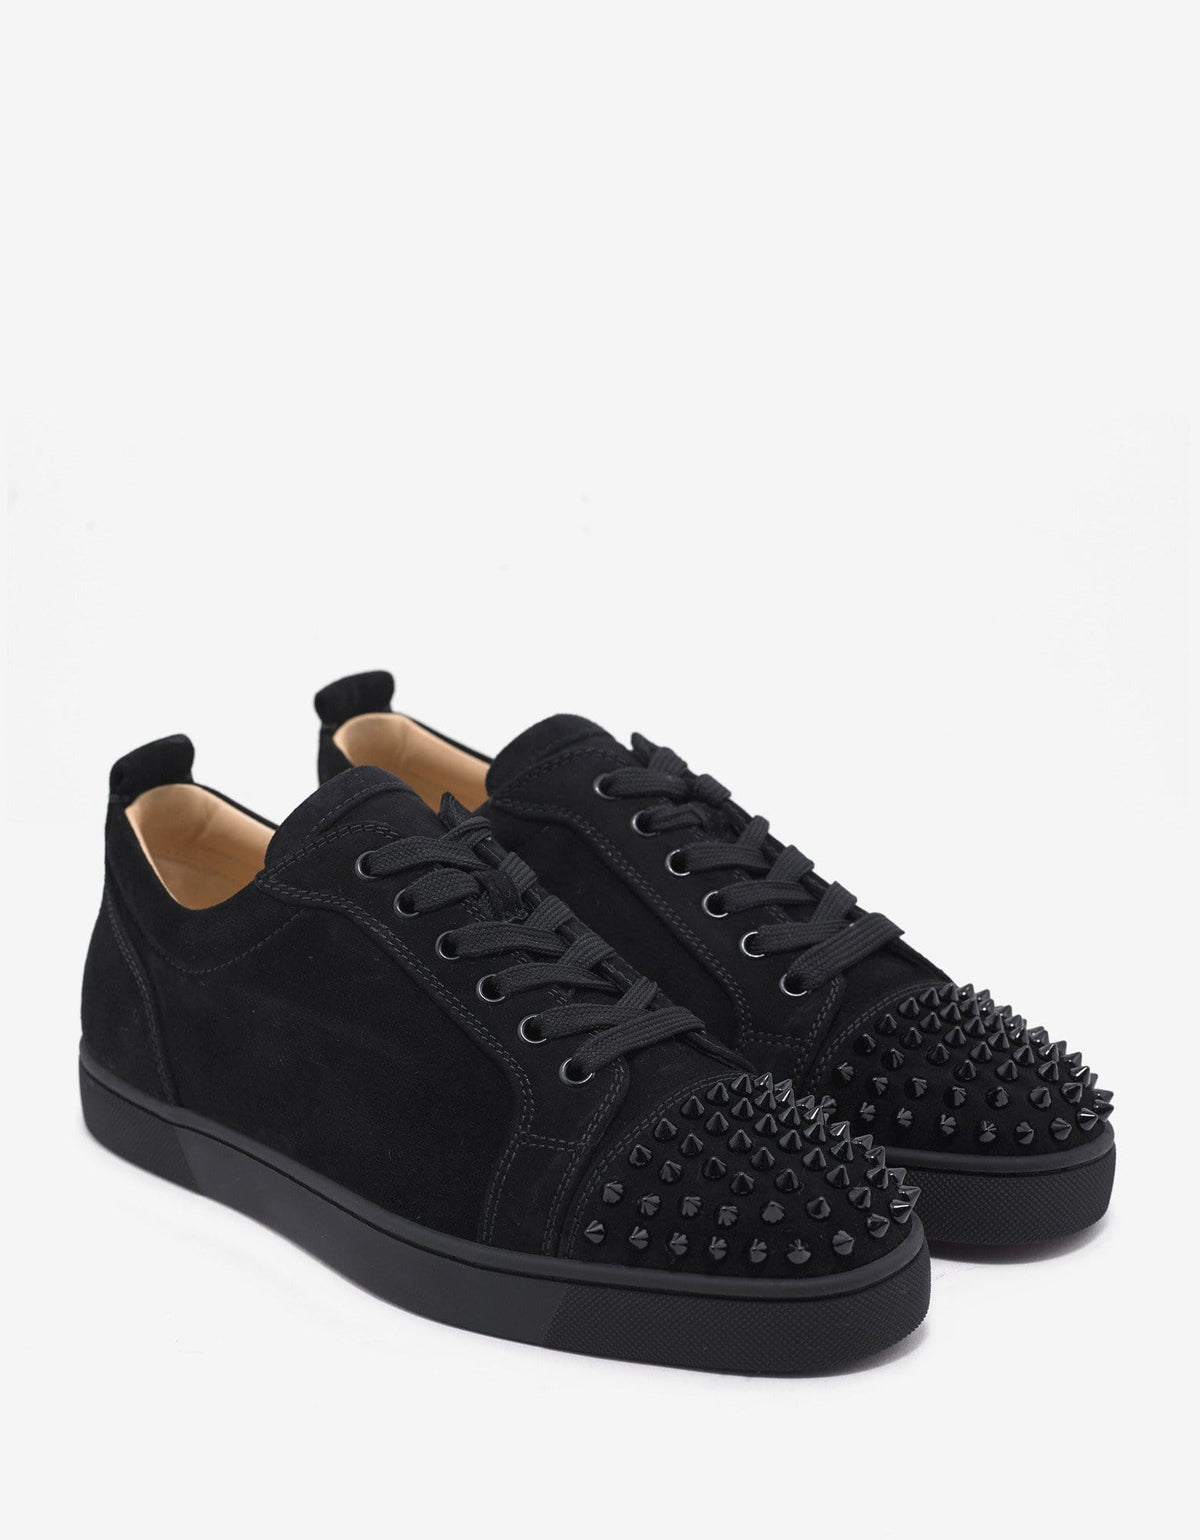 Christian Louboutin Louis Junior Spikes Flat Black Suede Trainers